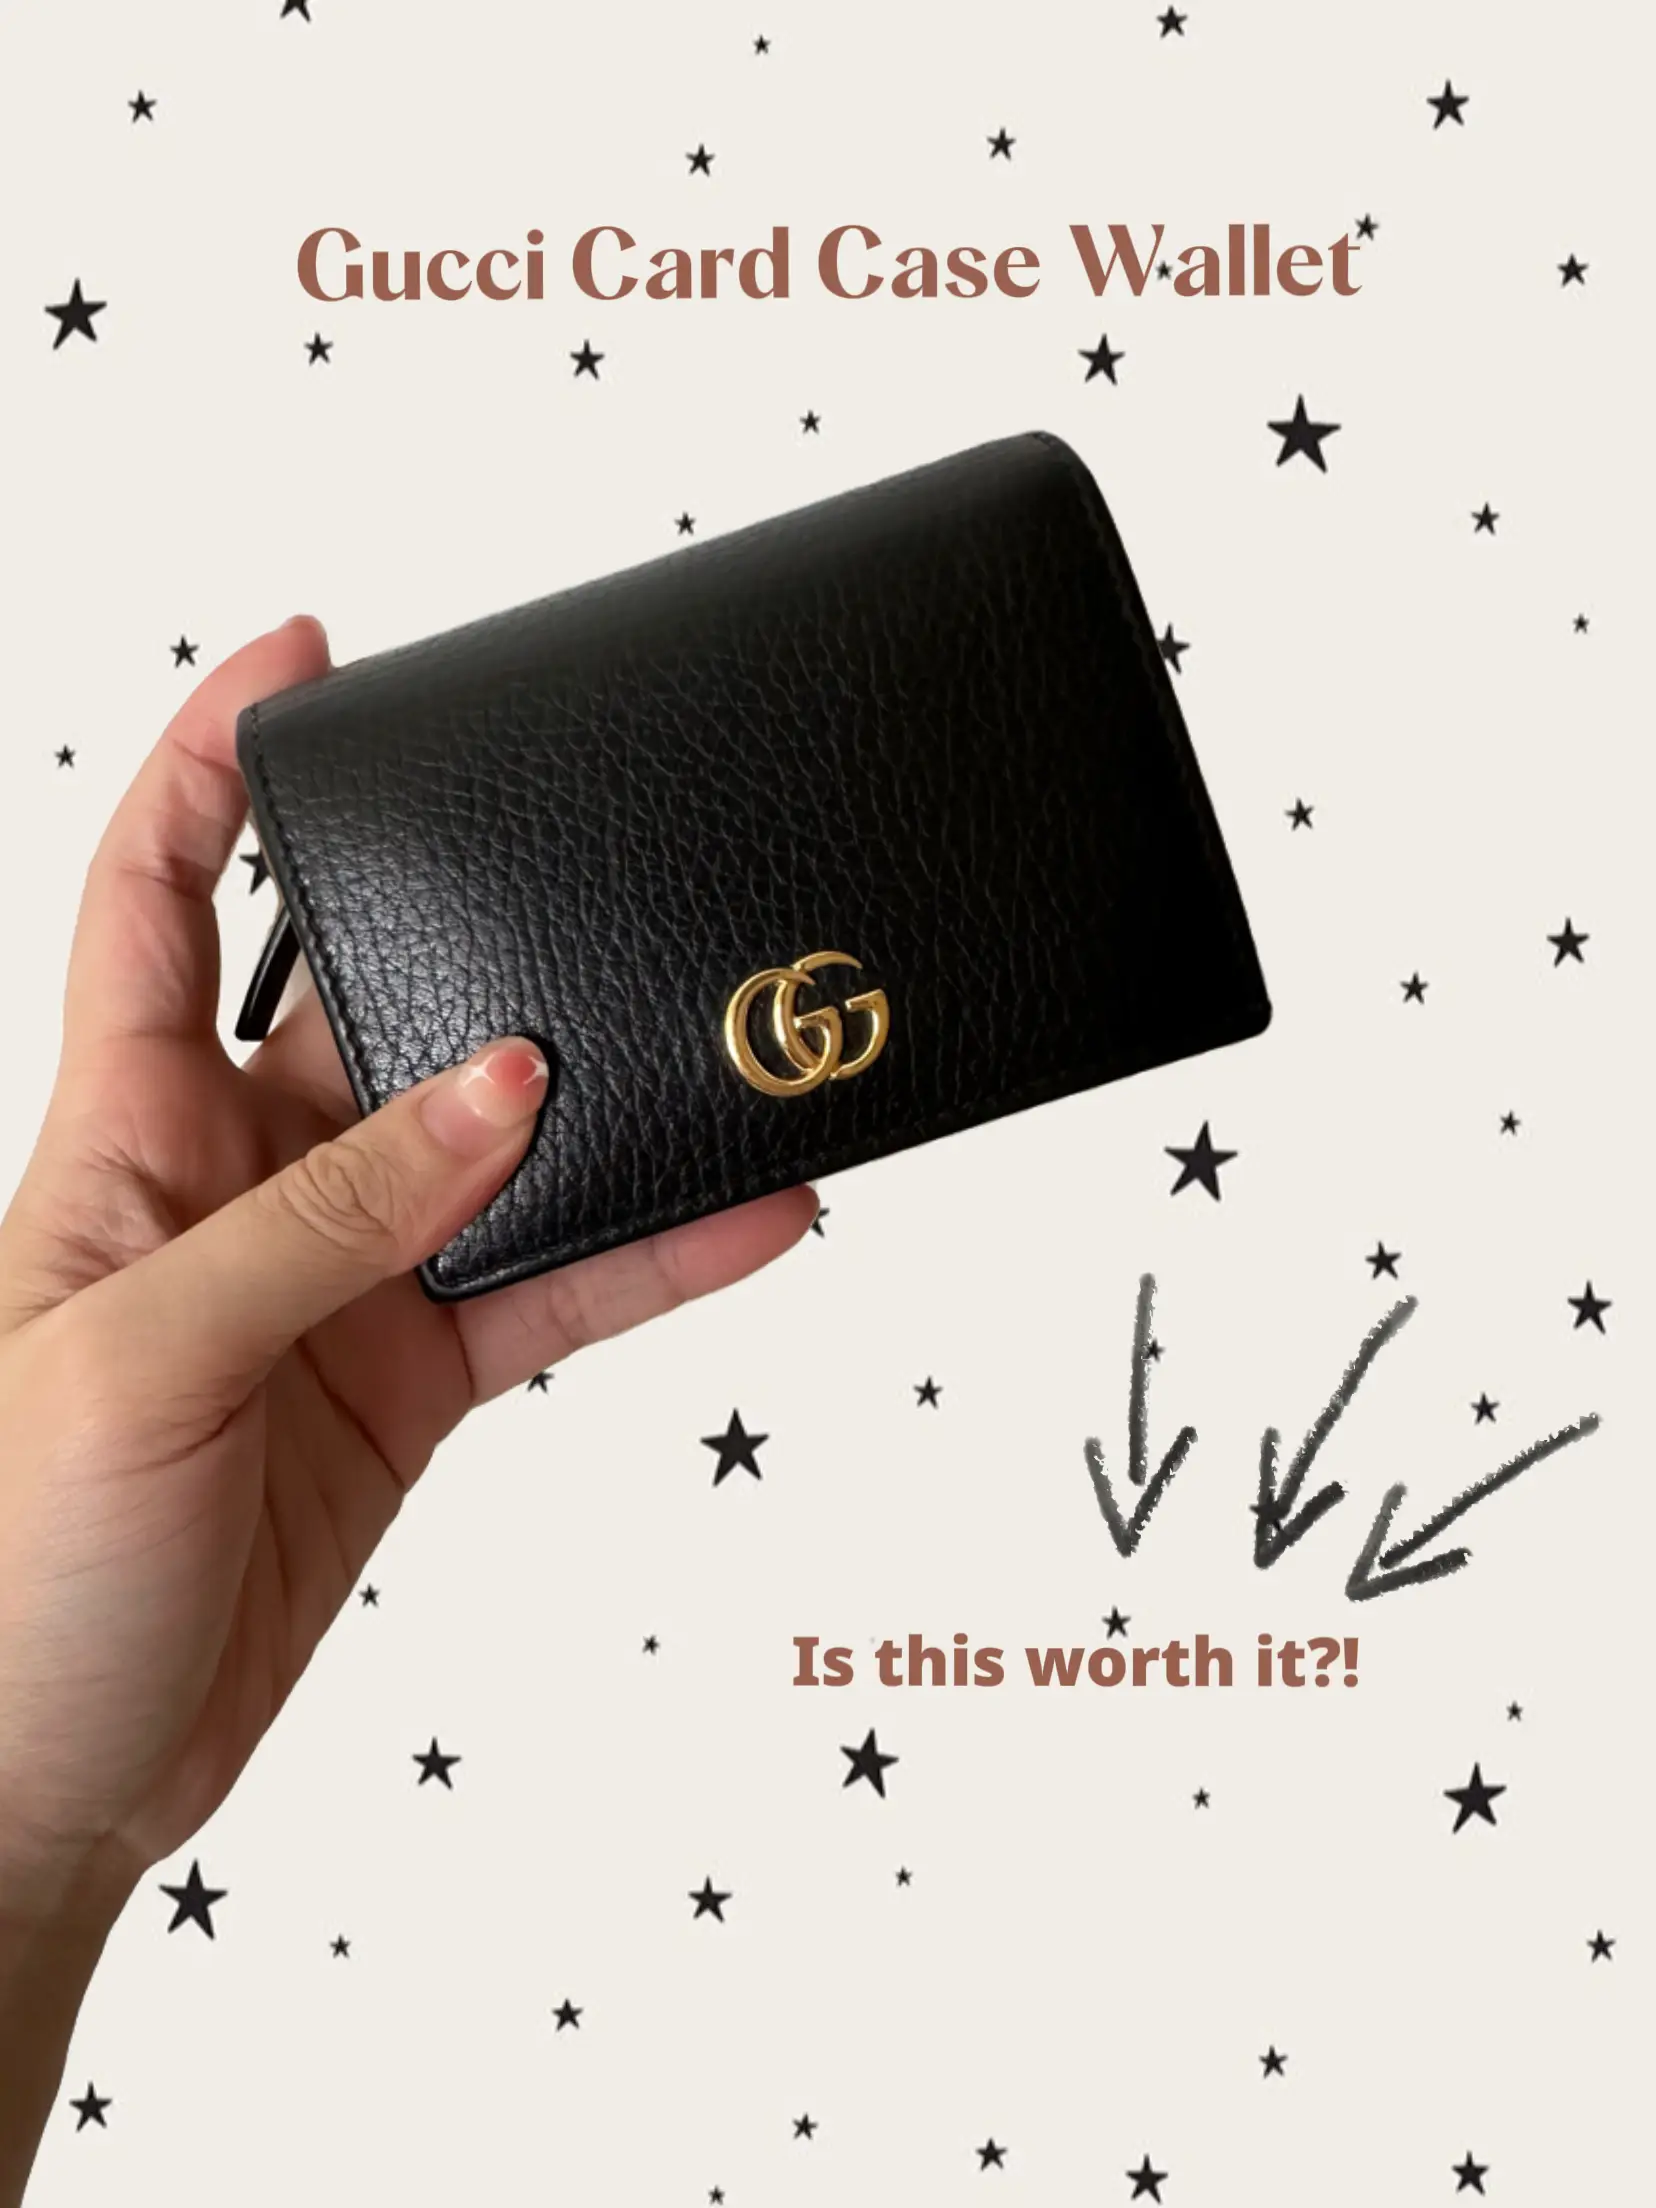 Is the Gucci leather card case wallet worth? | Gallery posted by